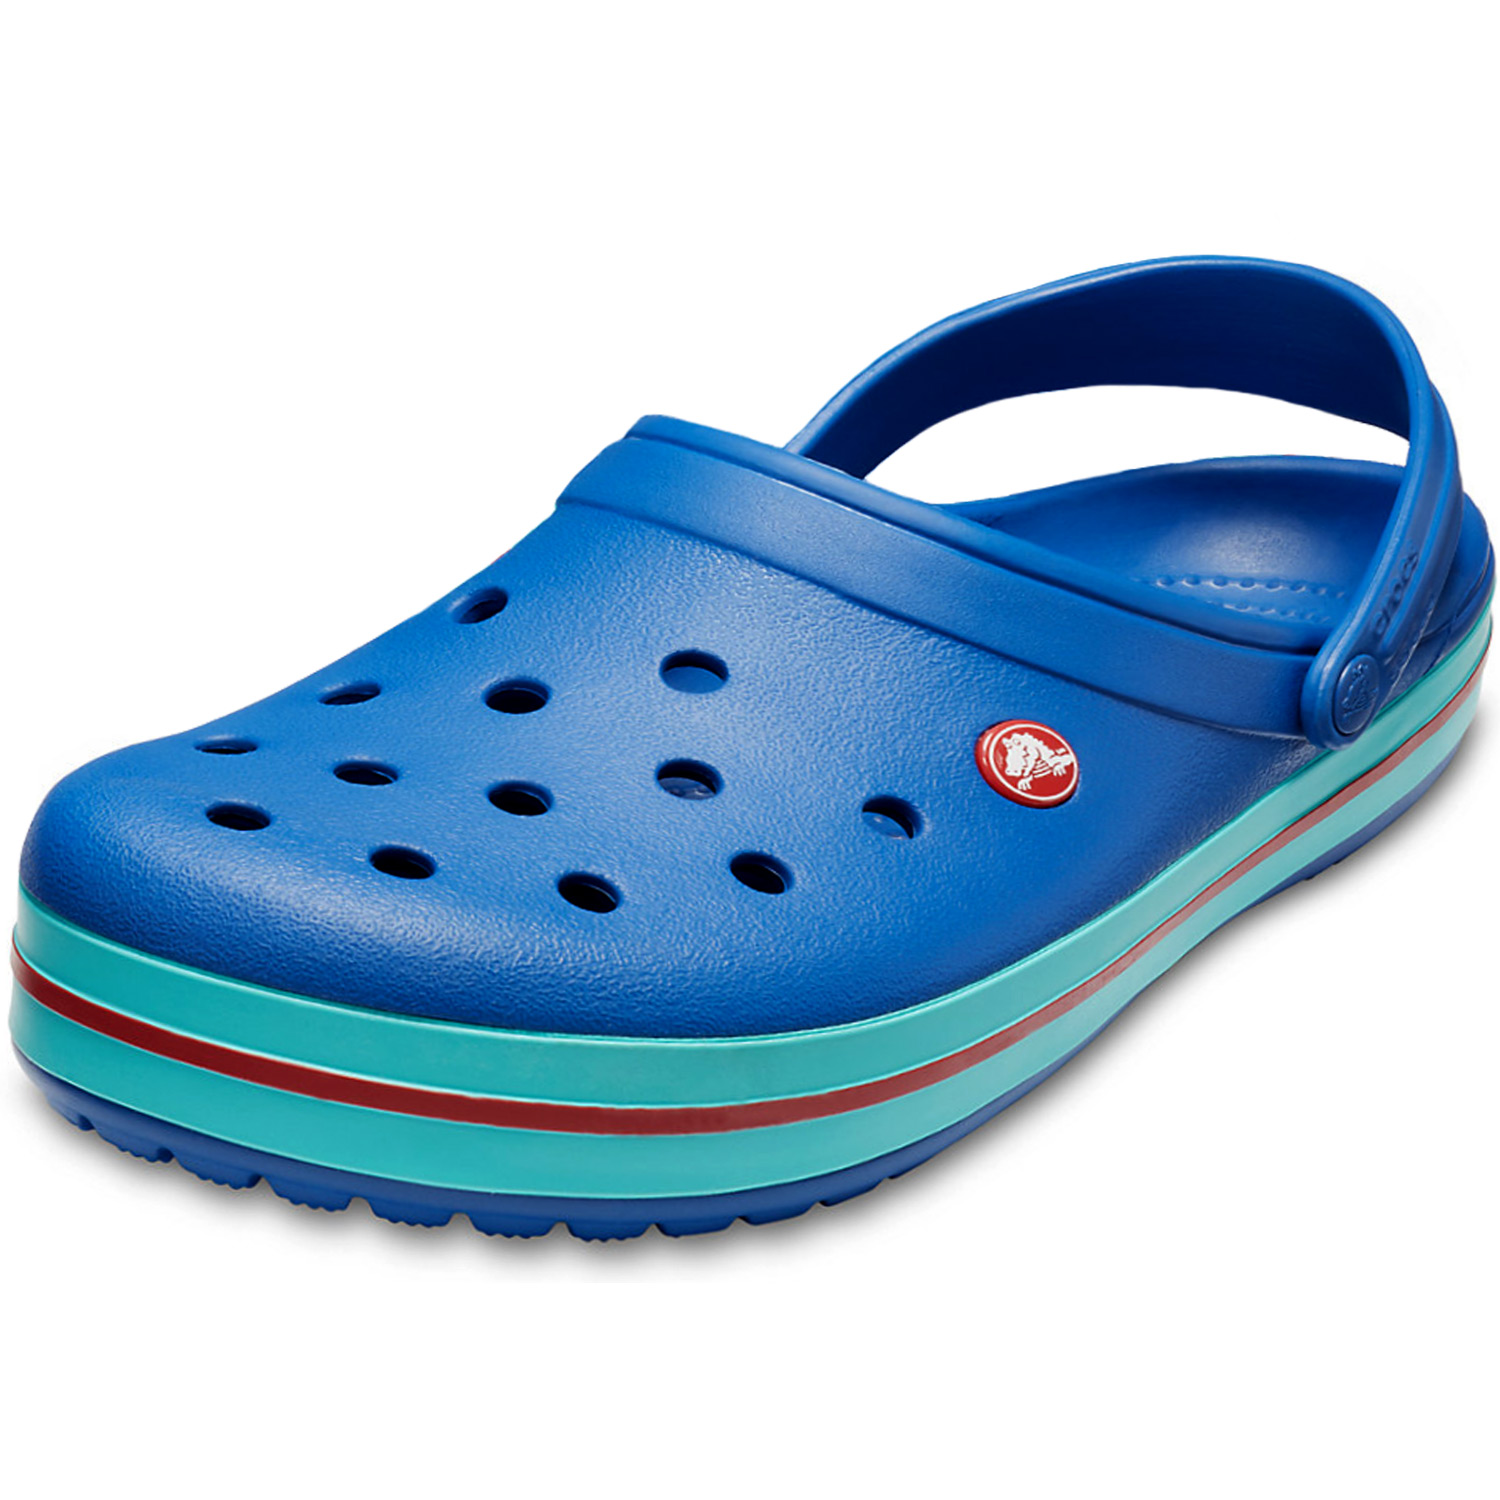 crocs safety shoes